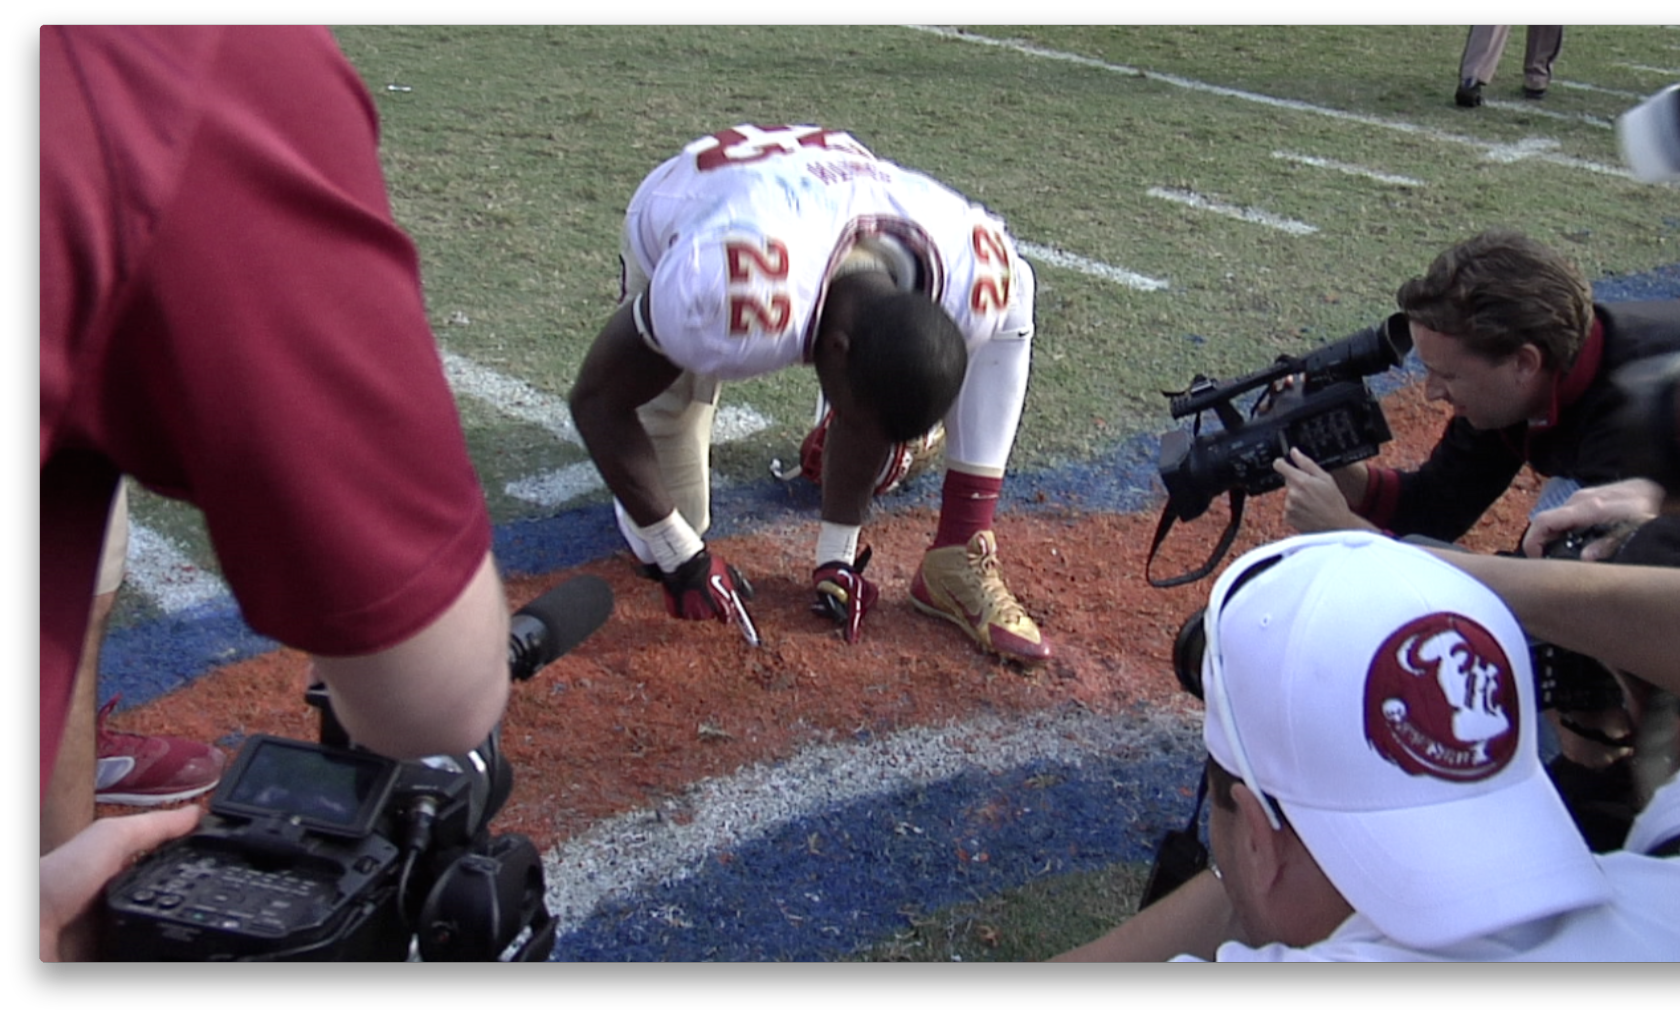 FSU player cuts turf from Florida Field while UF band plays Alma Mater